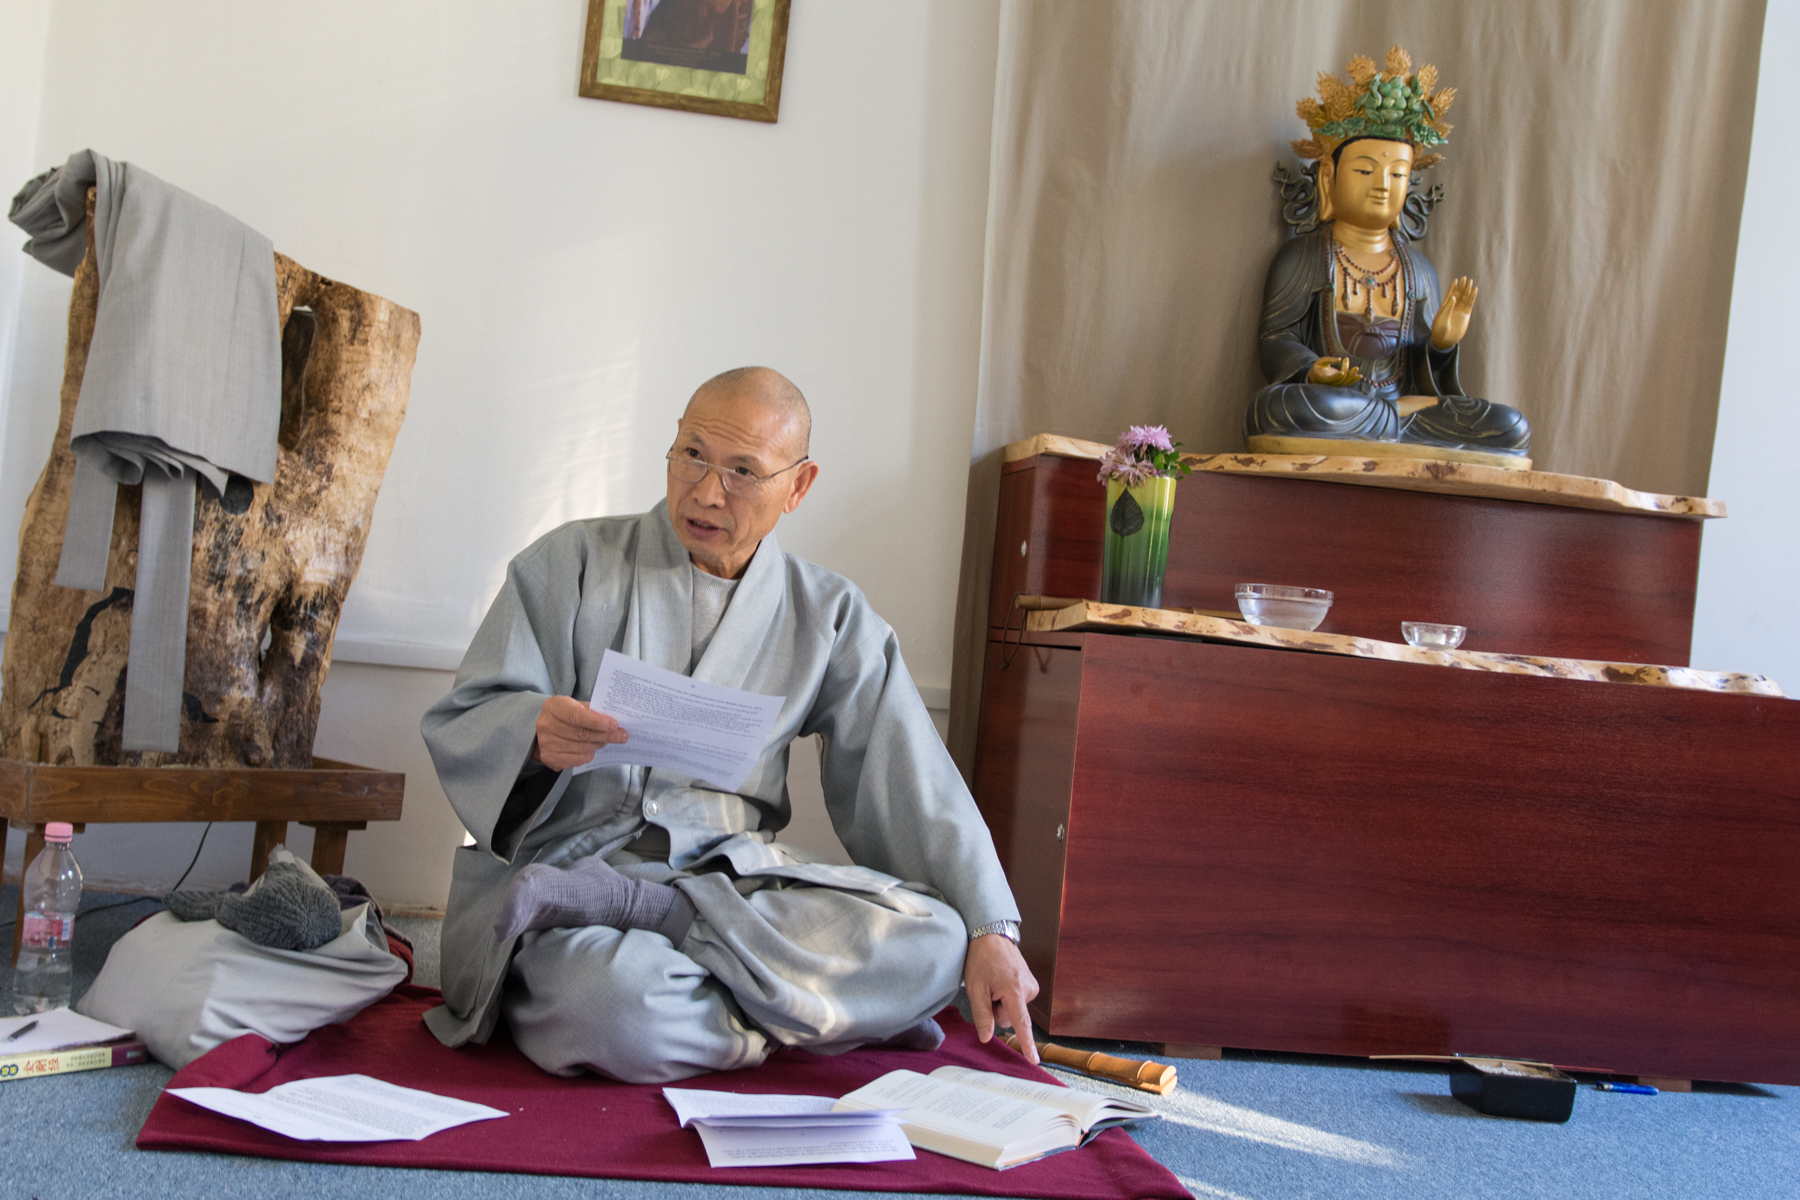 Six days intensive MCU seminar and meditation on the Diamond Sutra was held by Prof. Dr. Jinwol Lee (Dongguk University) zen master of the chogye order.